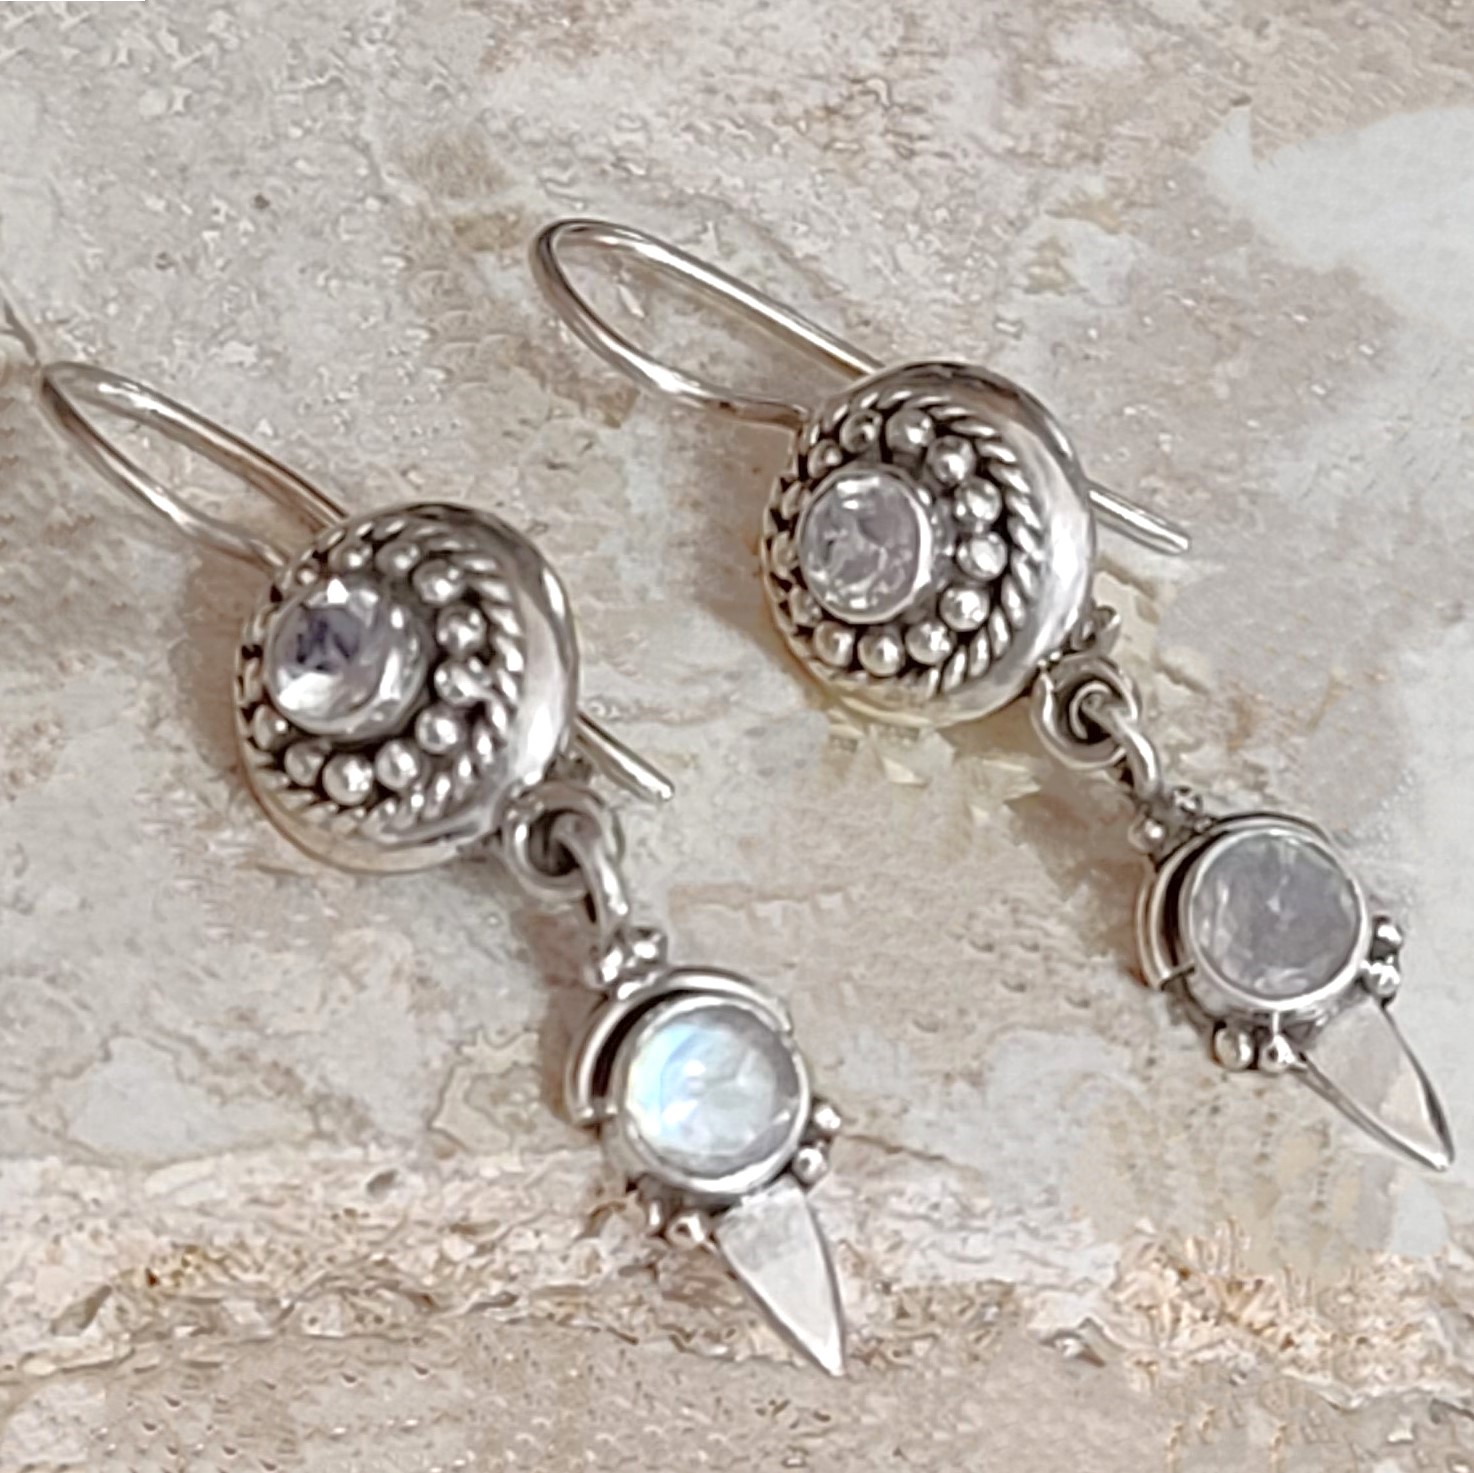 Moonstone earrings, with 925 sterling silver setting,